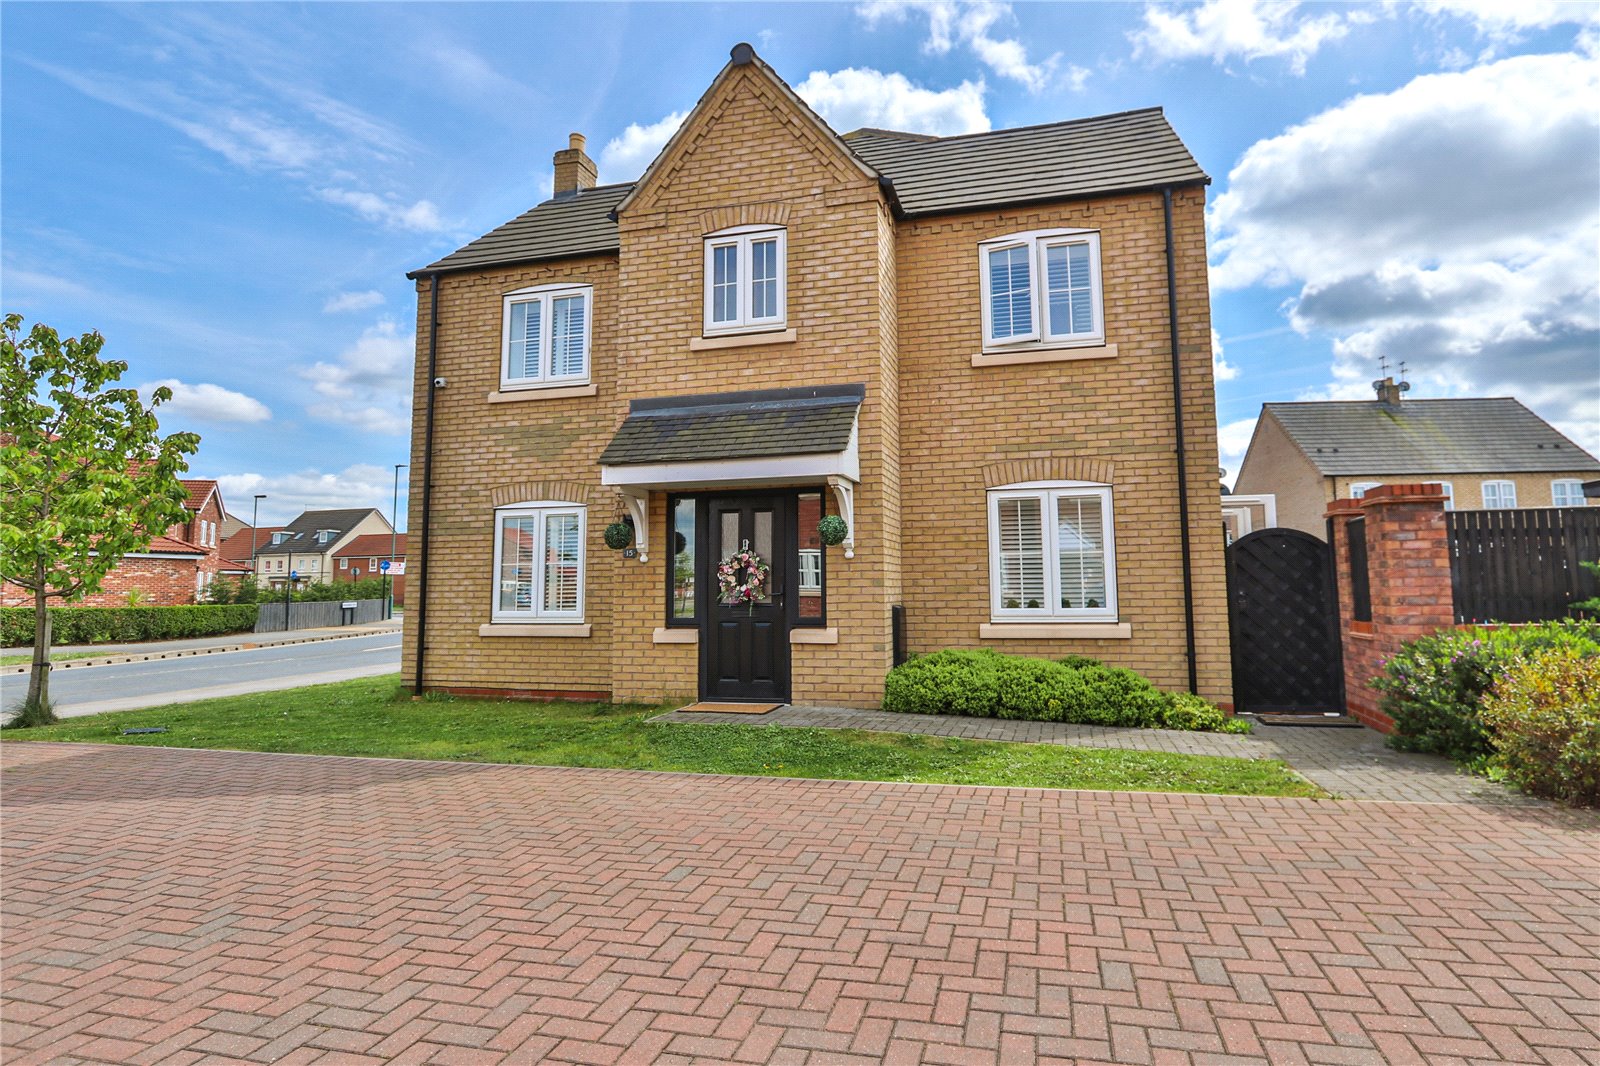 3 bed house for sale in Hamlet Drive, Kingswood, HU7 